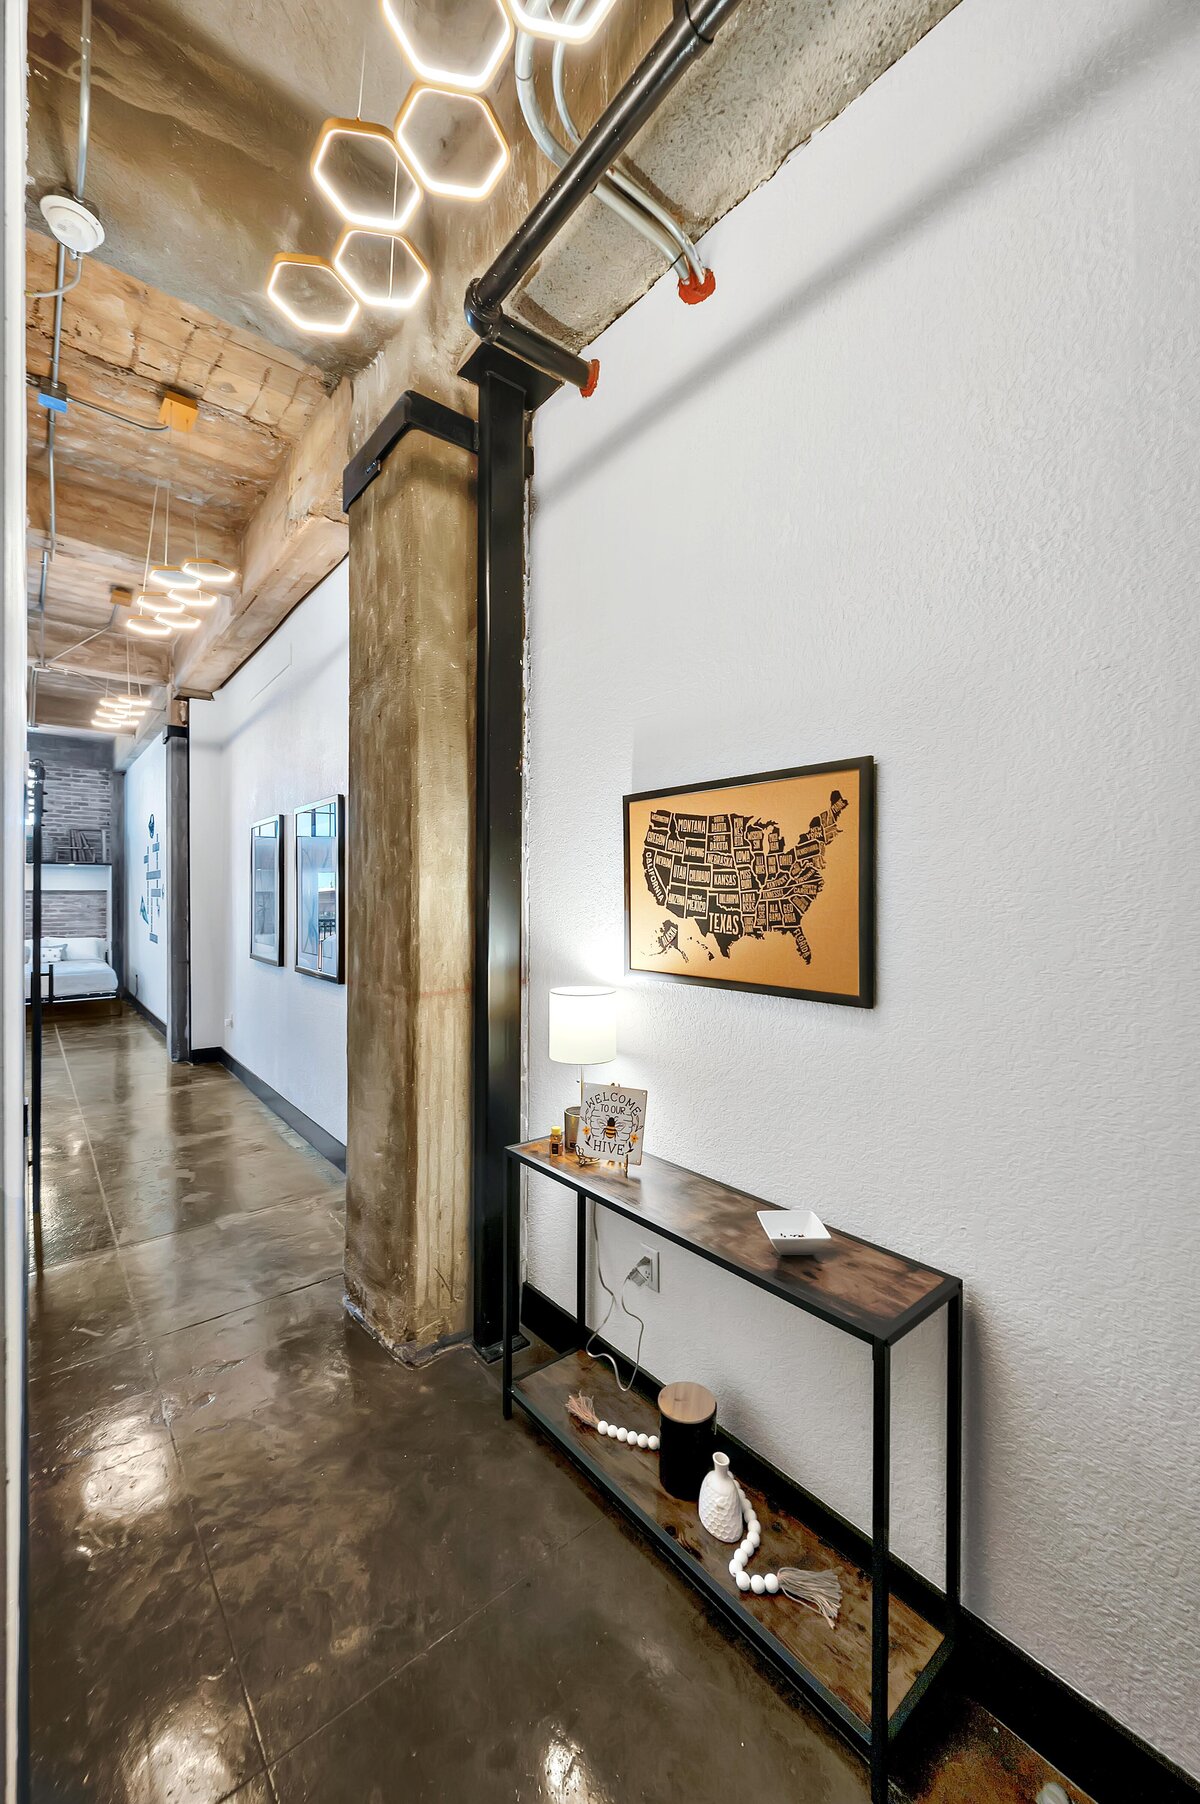 Stunning entrance to this one-bedroom, one-bathroom vintage condo that sleeps 4 in the historic Behrens building in the heart of the Magnolia Silo District in downtown Waco, TX.